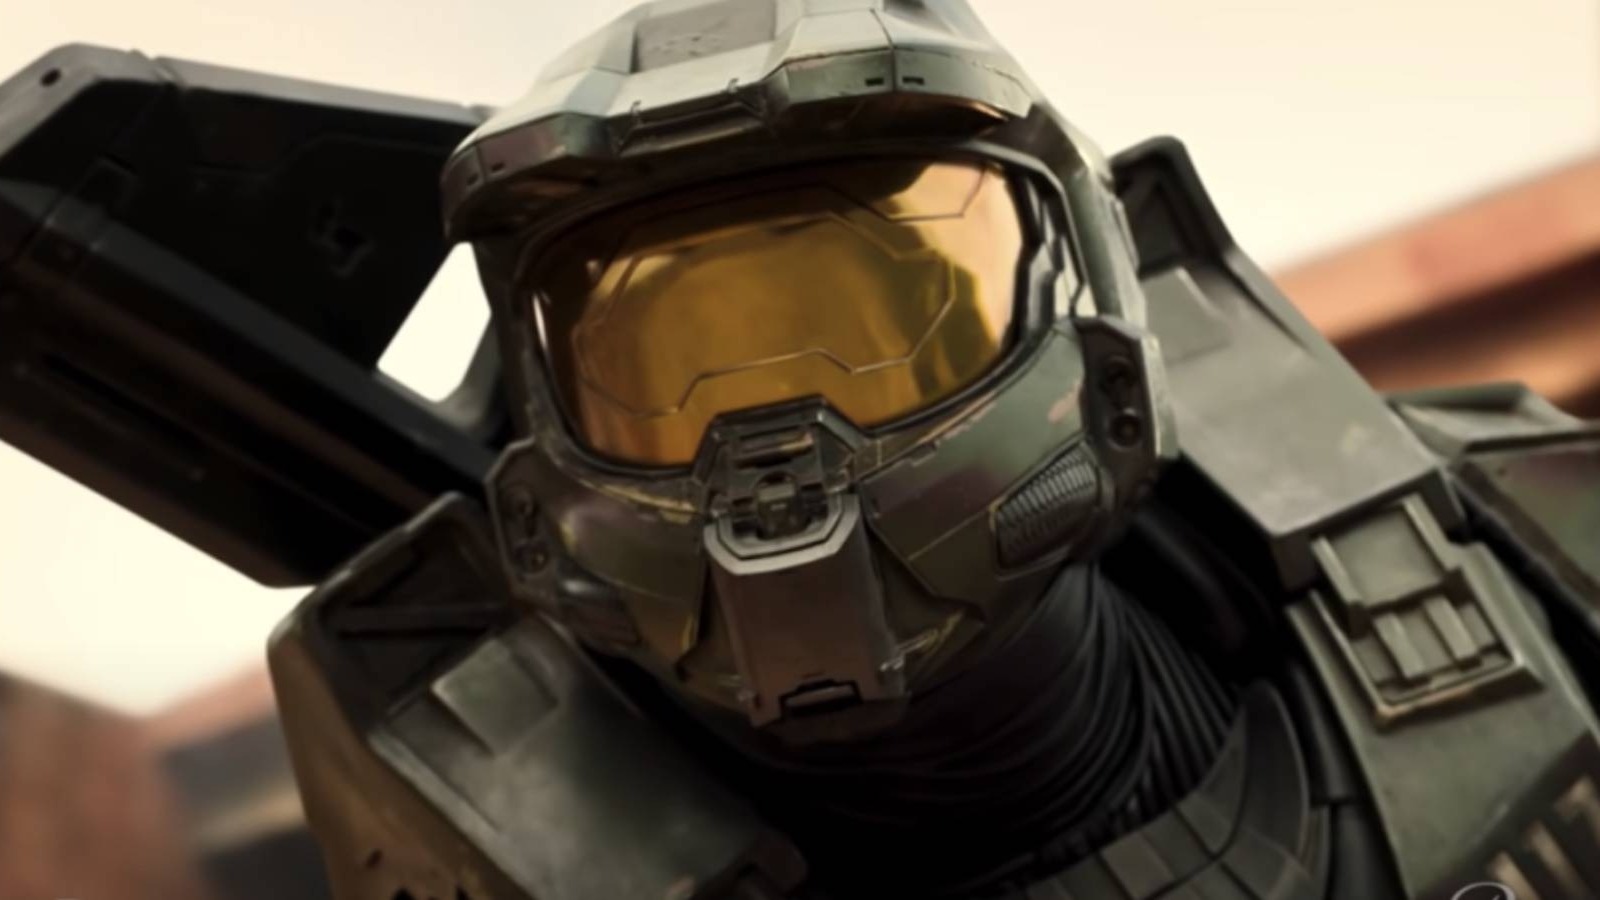 Halo Season 2 - Everything You Need to Know About the Show's Renewal